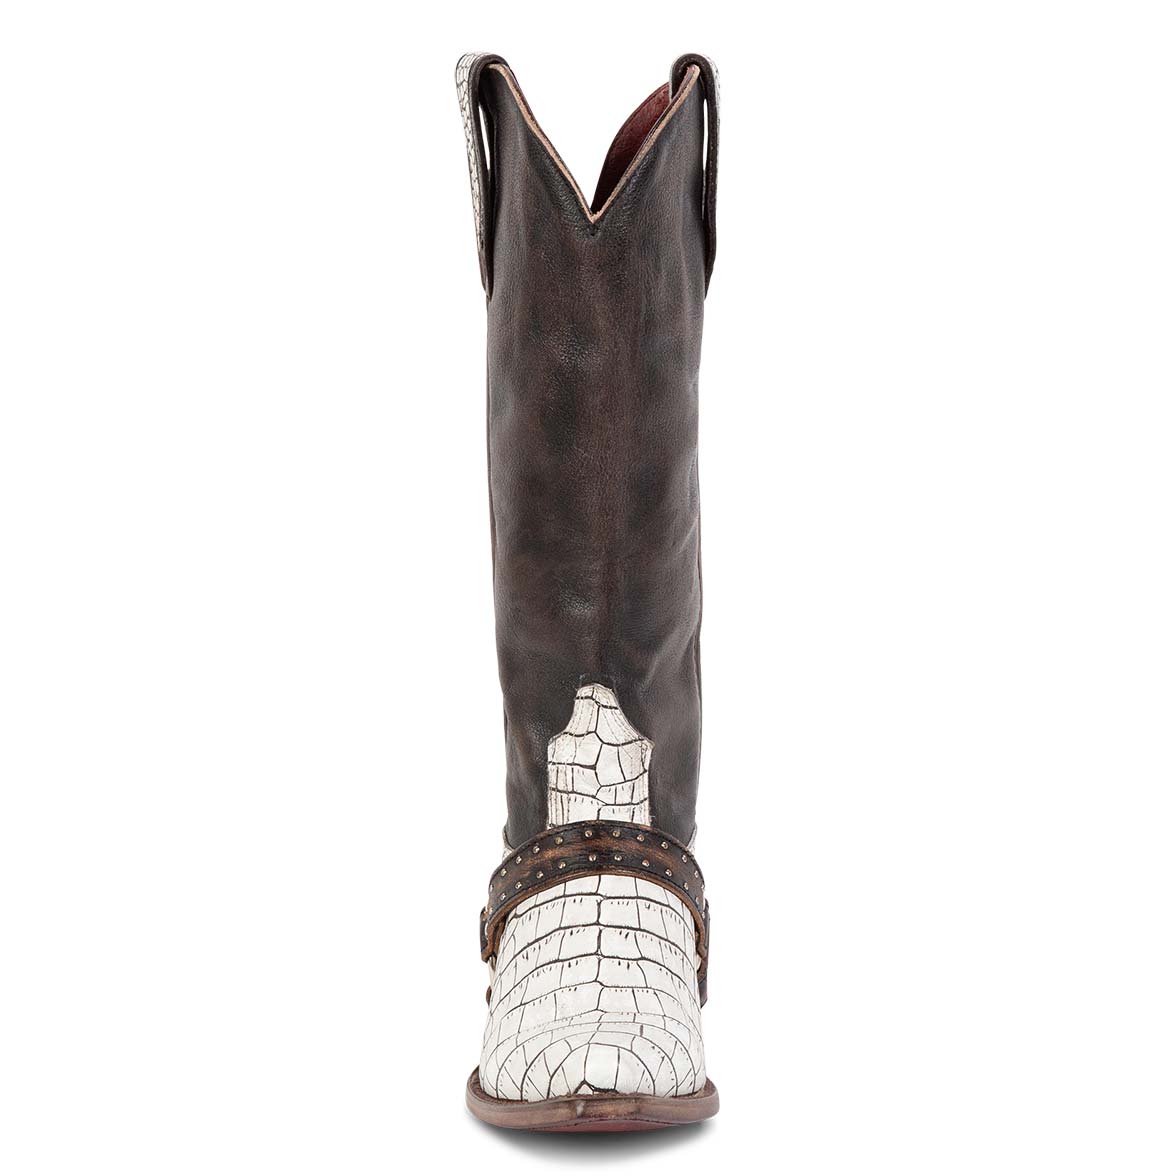 Front view showing scallop dip and leather harness with silver stud detailing on FREEBIRD women's Lusitano white croco multi boot